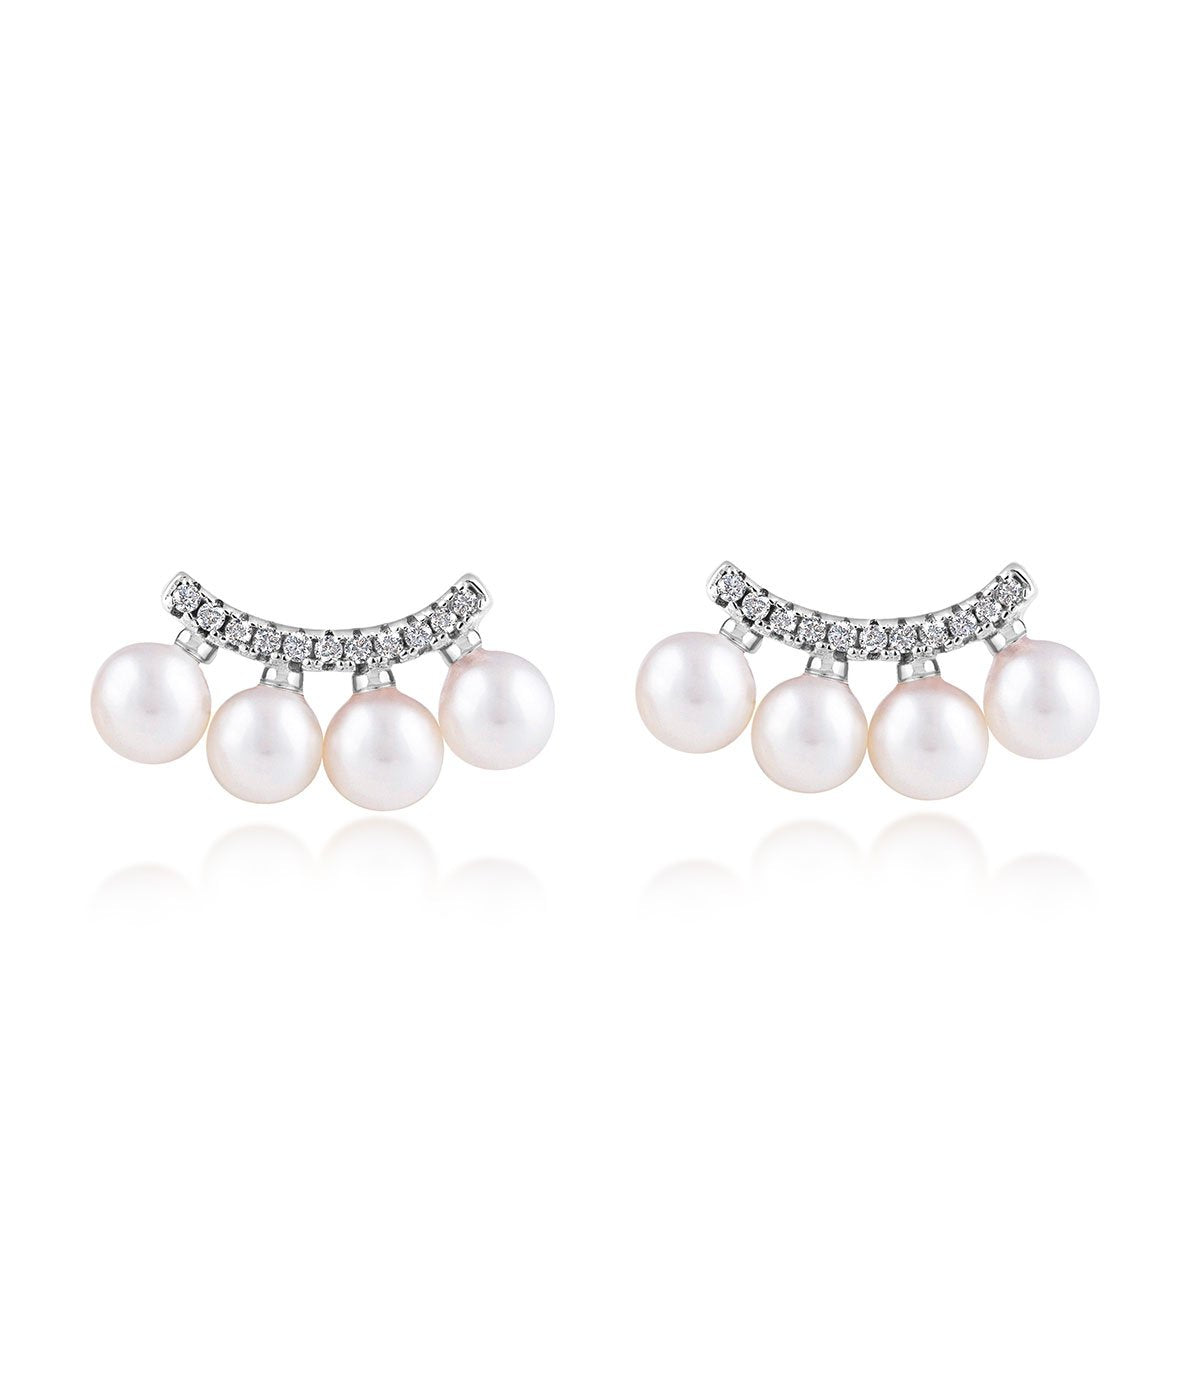 Starlight Pearl Ear Climber Earrings in Rhodium Plated Sterling Silver